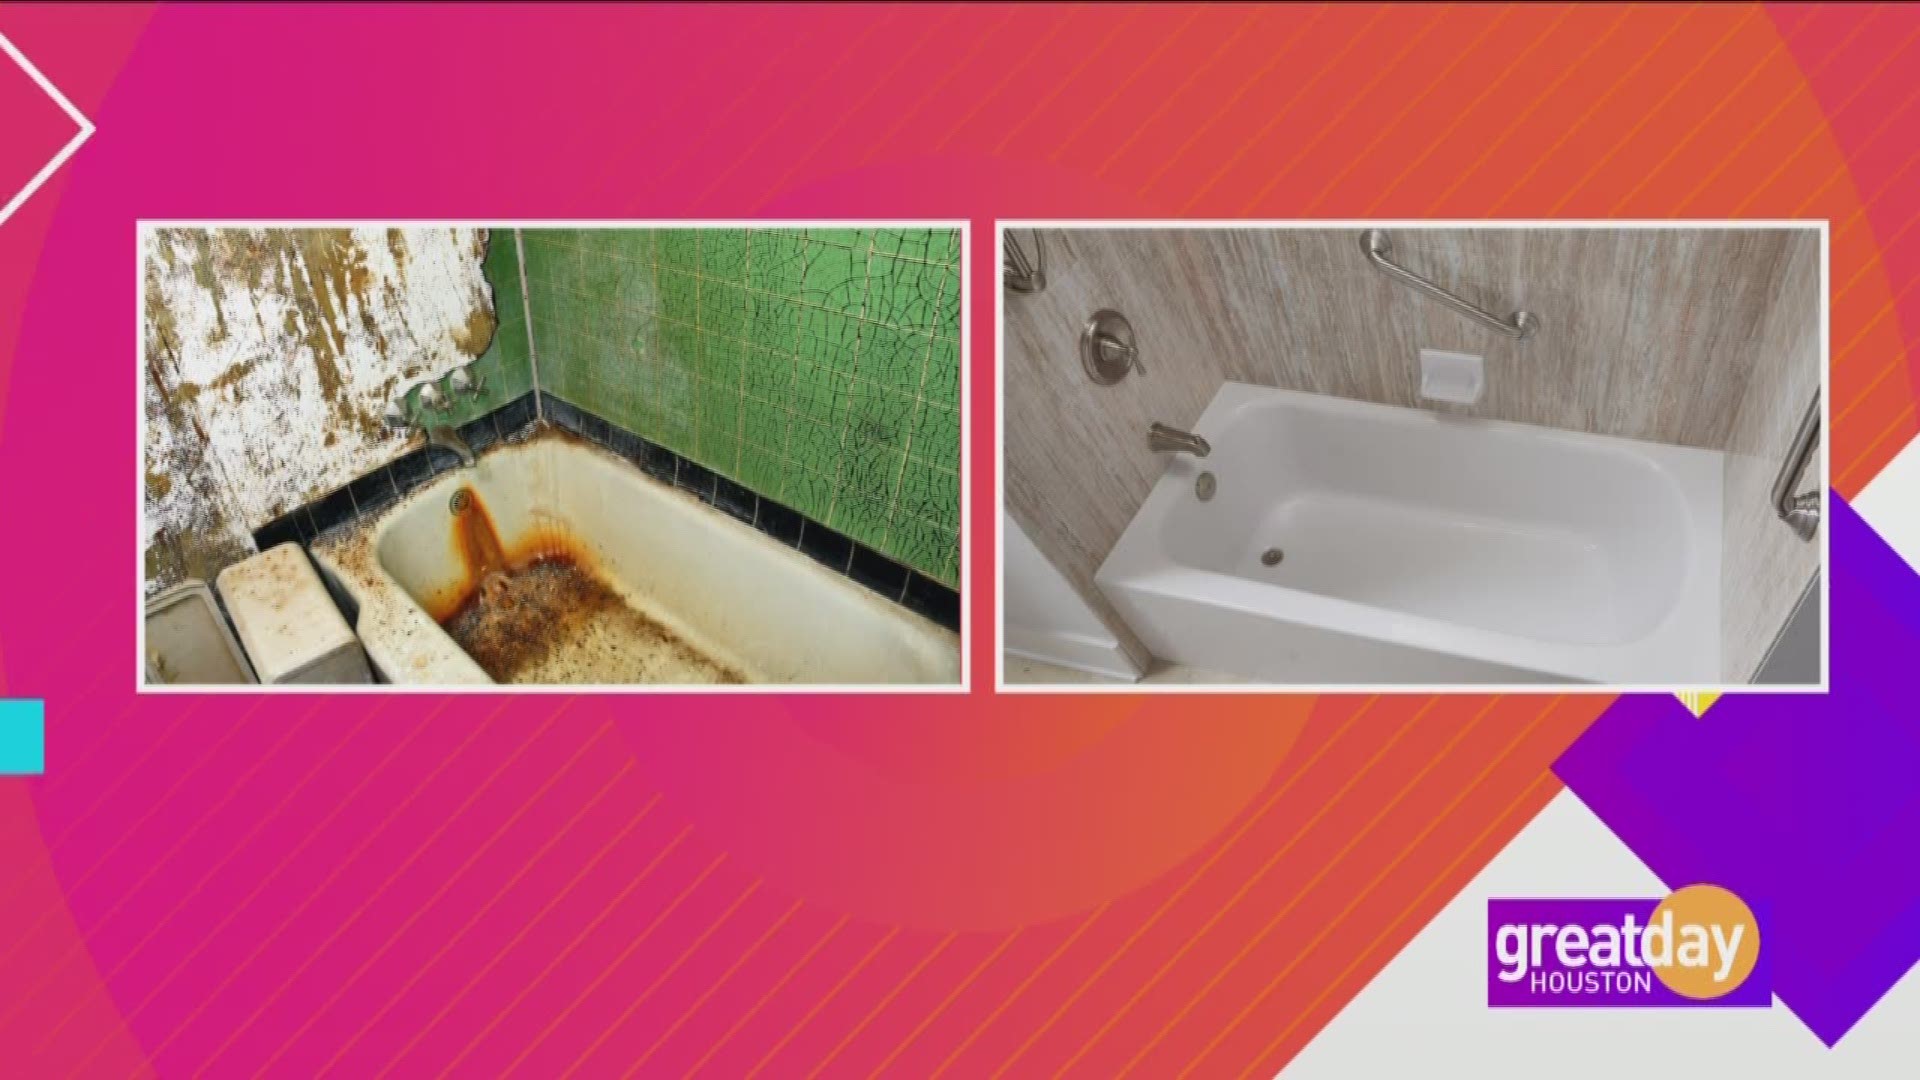 Larry Closs with MaxHome explains how he can replace your bathtub or shower in just one day.